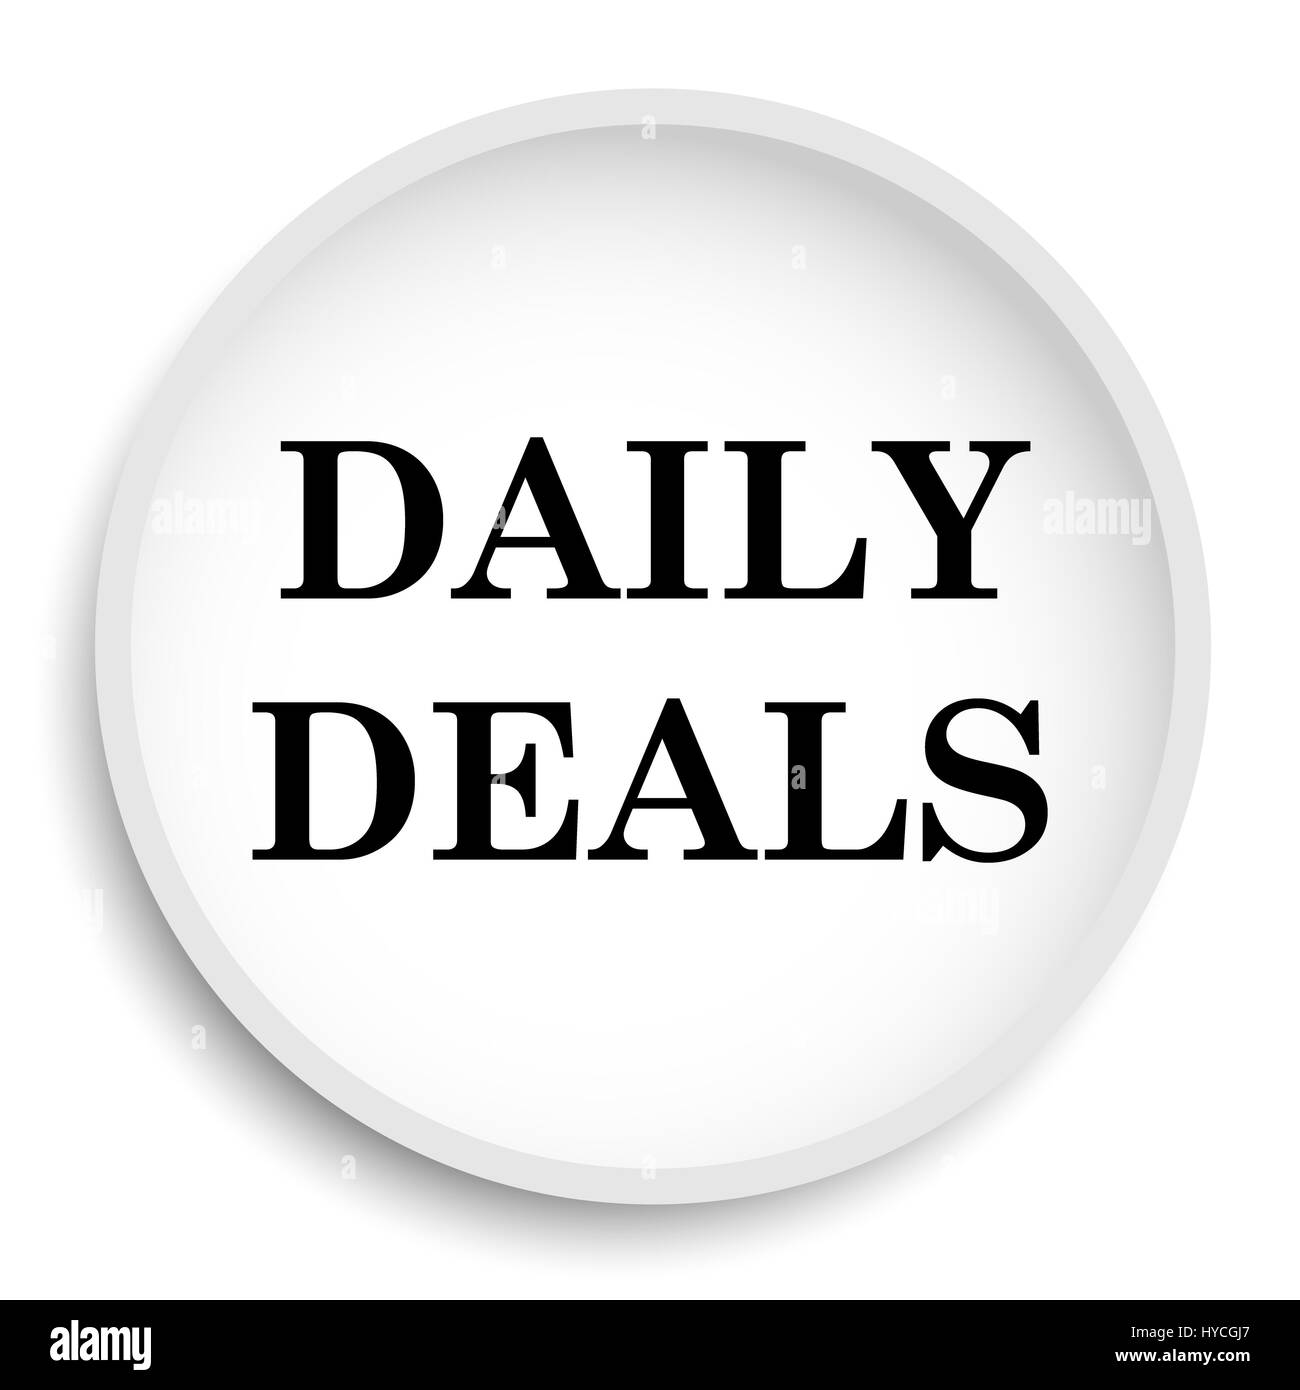 https://c8.alamy.com/comp/HYCGJ7/daily-deals-icon-daily-deals-website-button-on-white-background-HYCGJ7.jpg